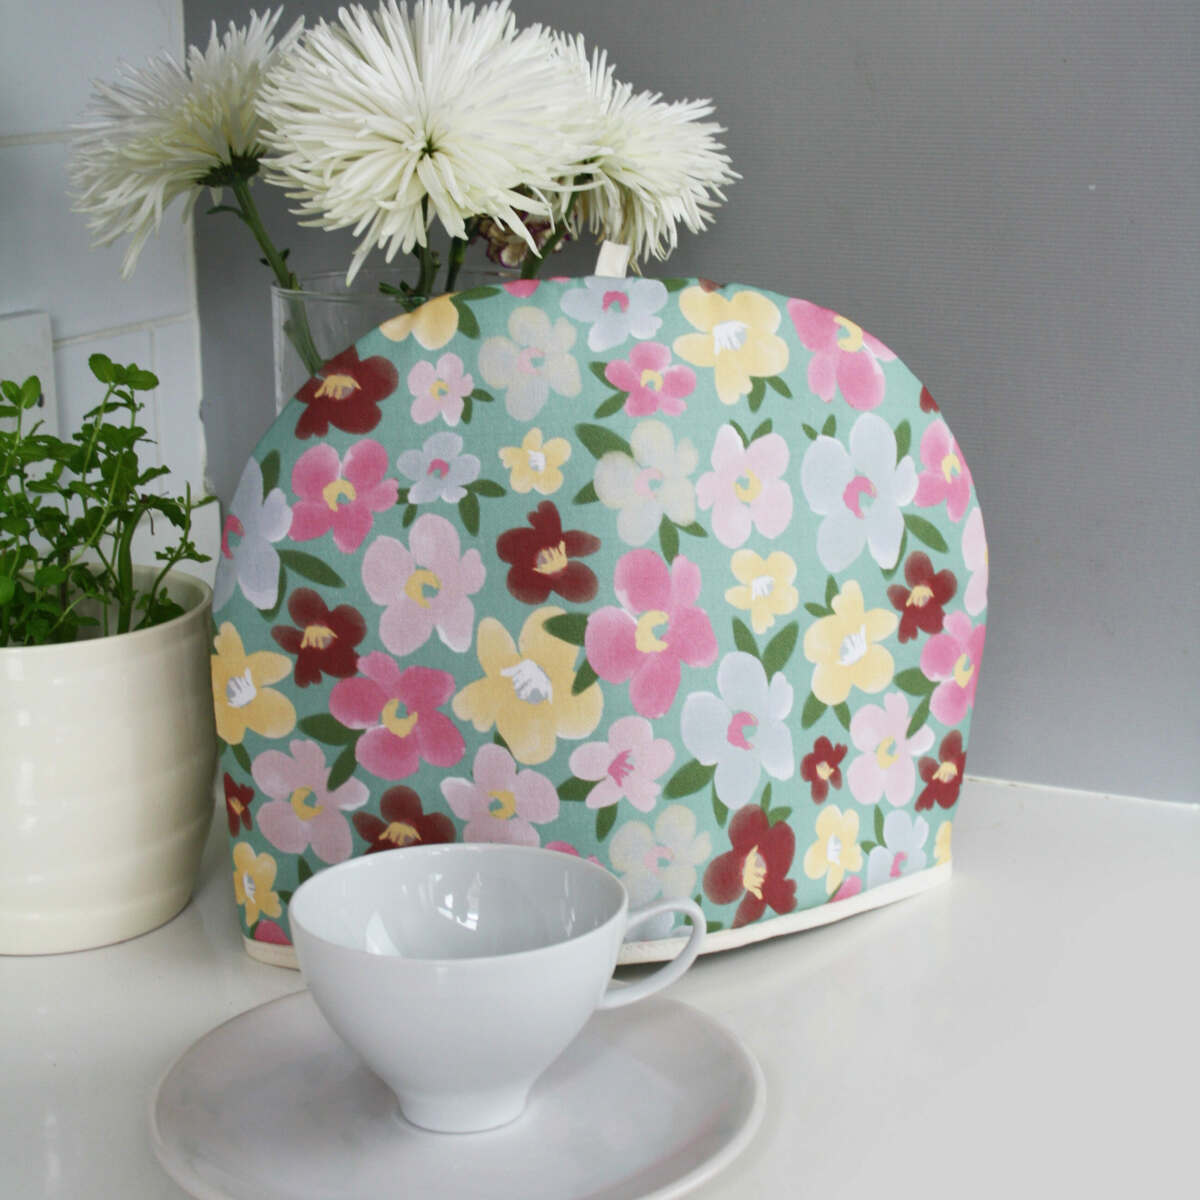 Tea Cosy "All In Blooms"